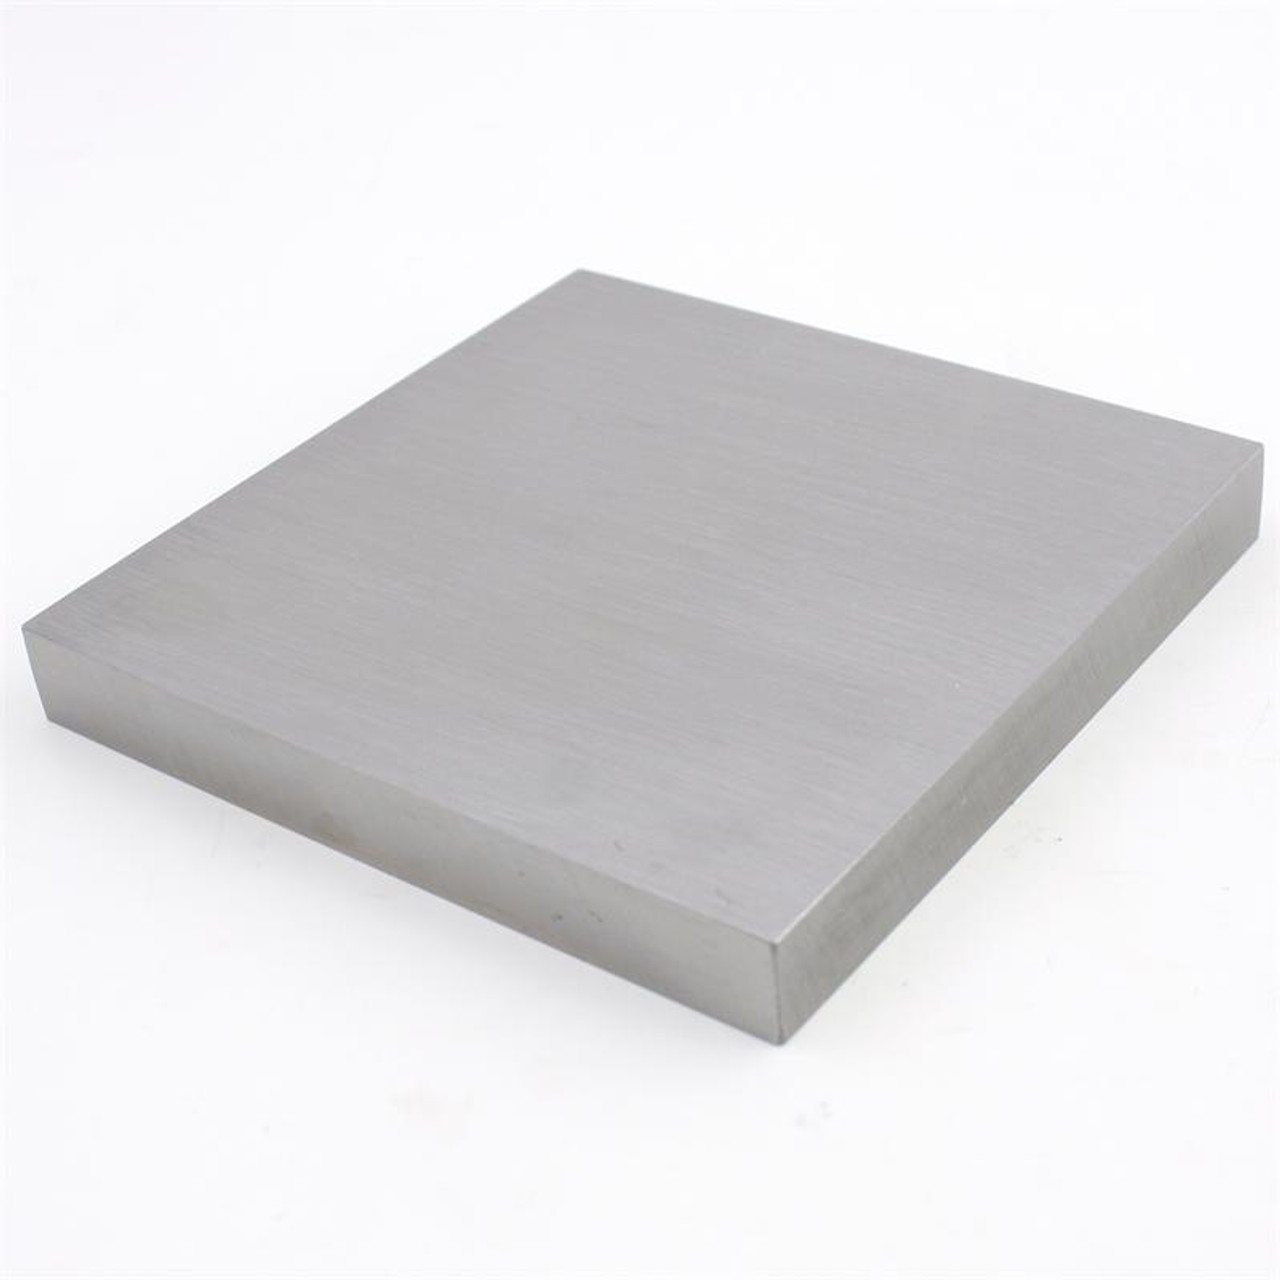 JEWELERS BENCH BLOCK RUBBER 4 x 4 SQUARE 1 THICK